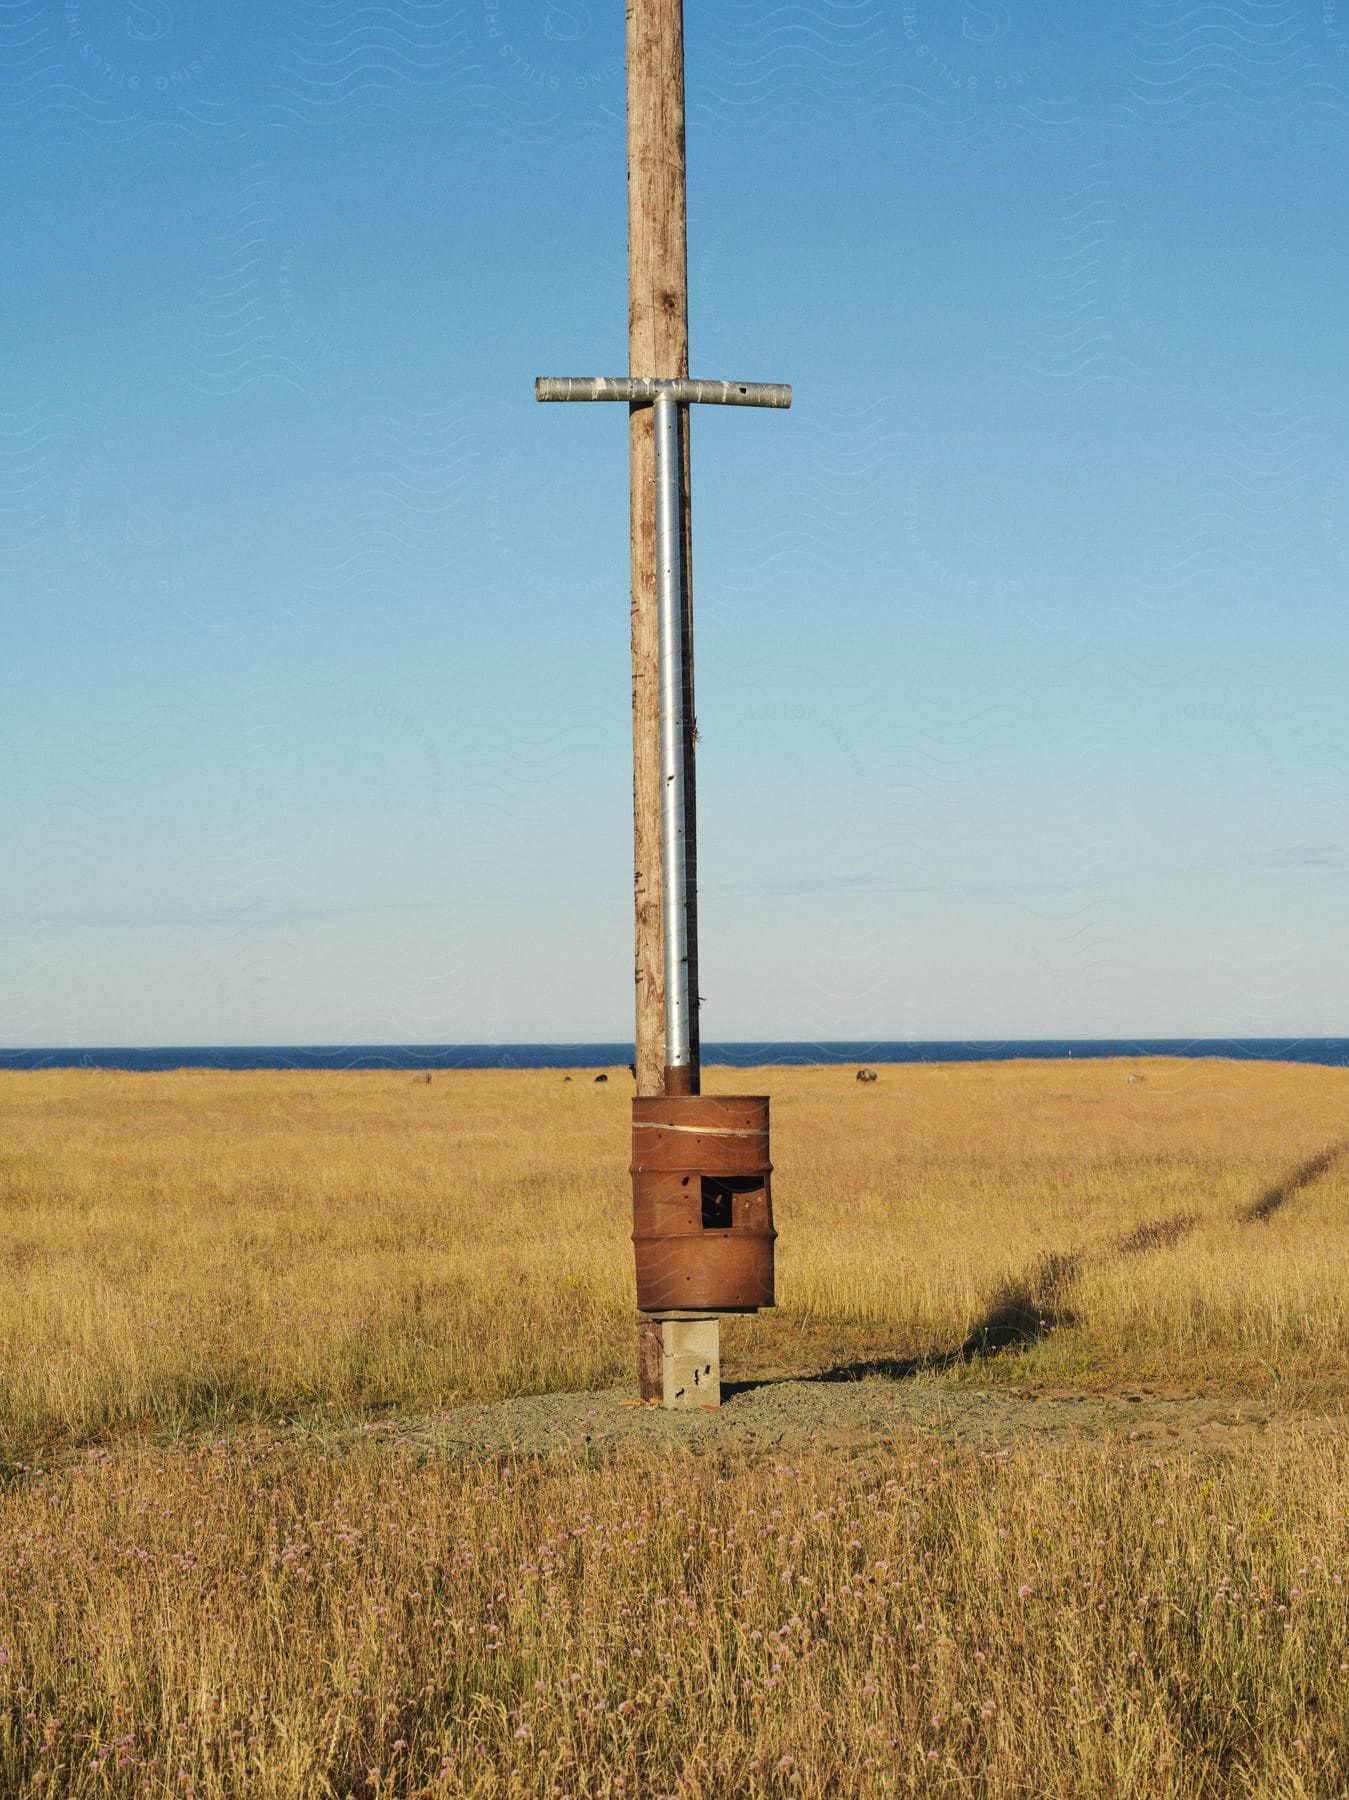 A rusted metal barrel attached to a telephone pole in a brown grass field